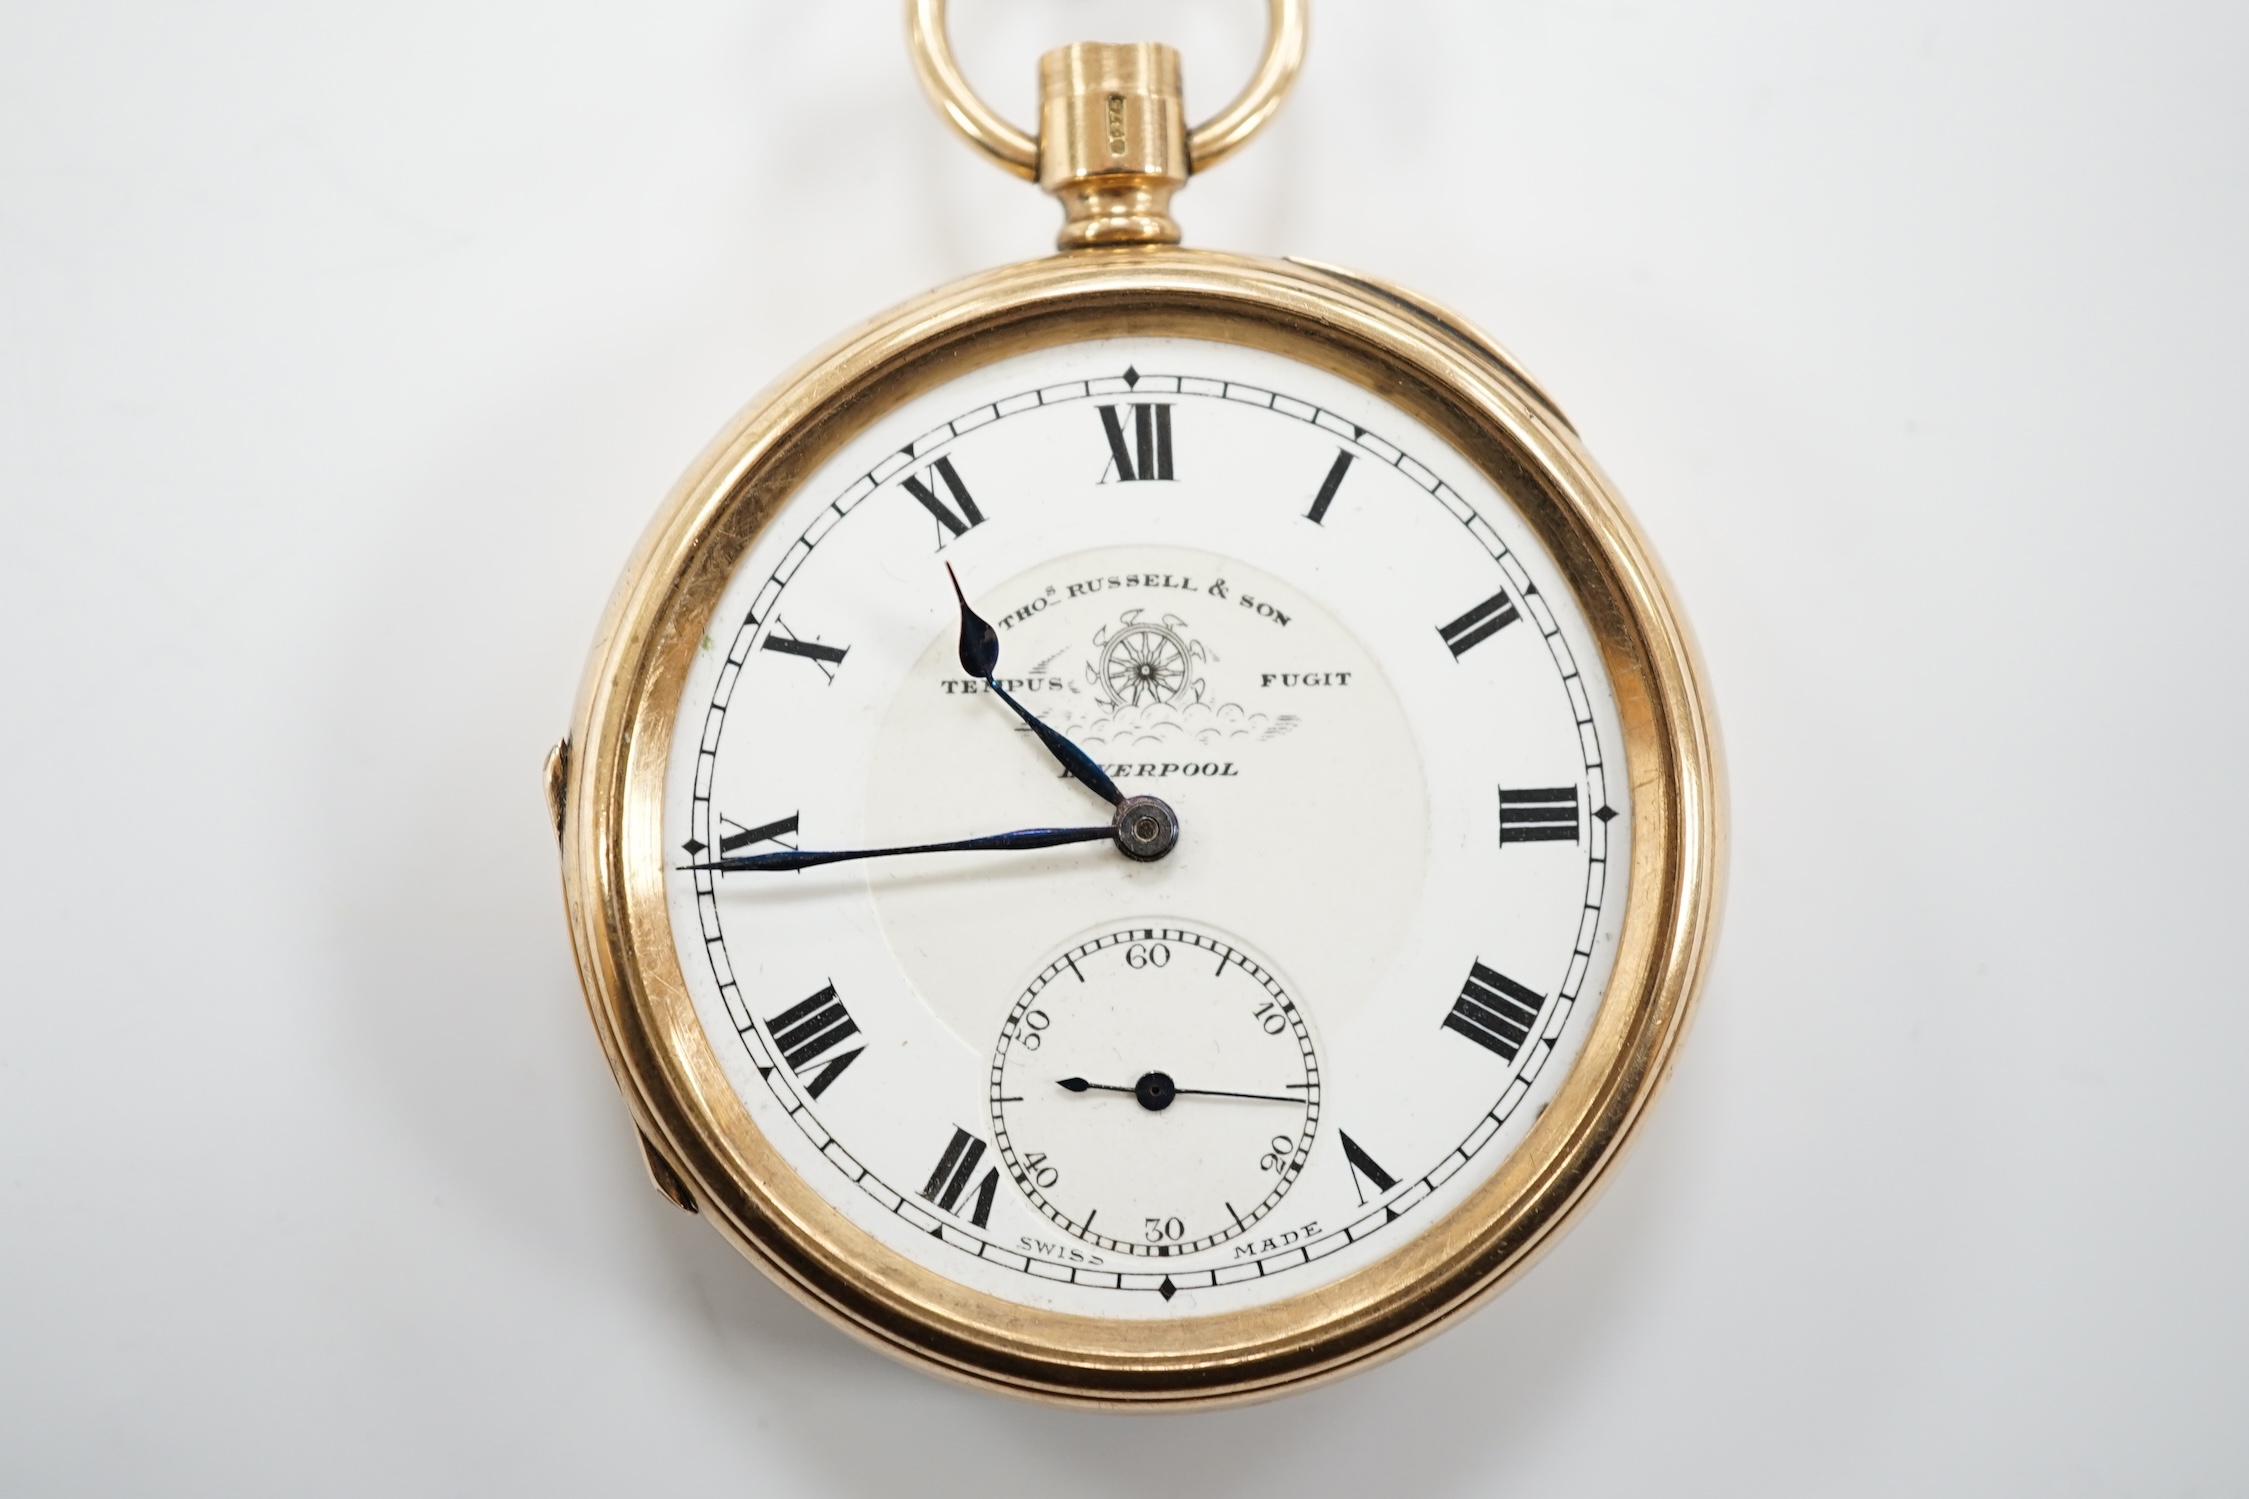 A 9ct gold open face pocket watch by Thomas Russell & Sons of Liverpool, with Roman dial